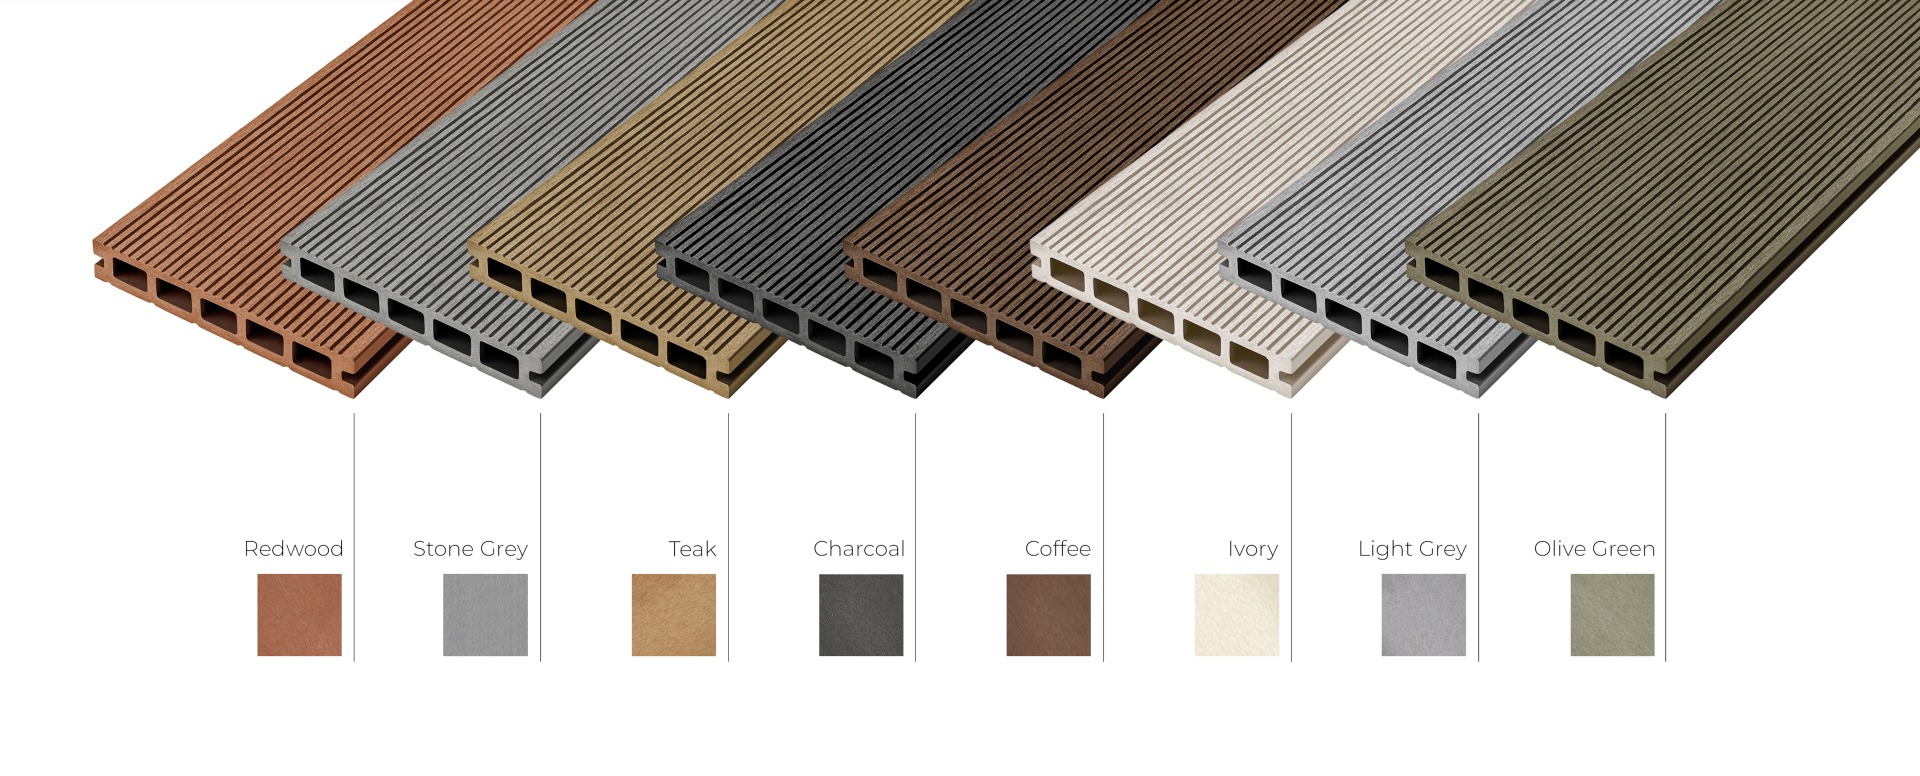 Cladco range of hollow composite decking boards